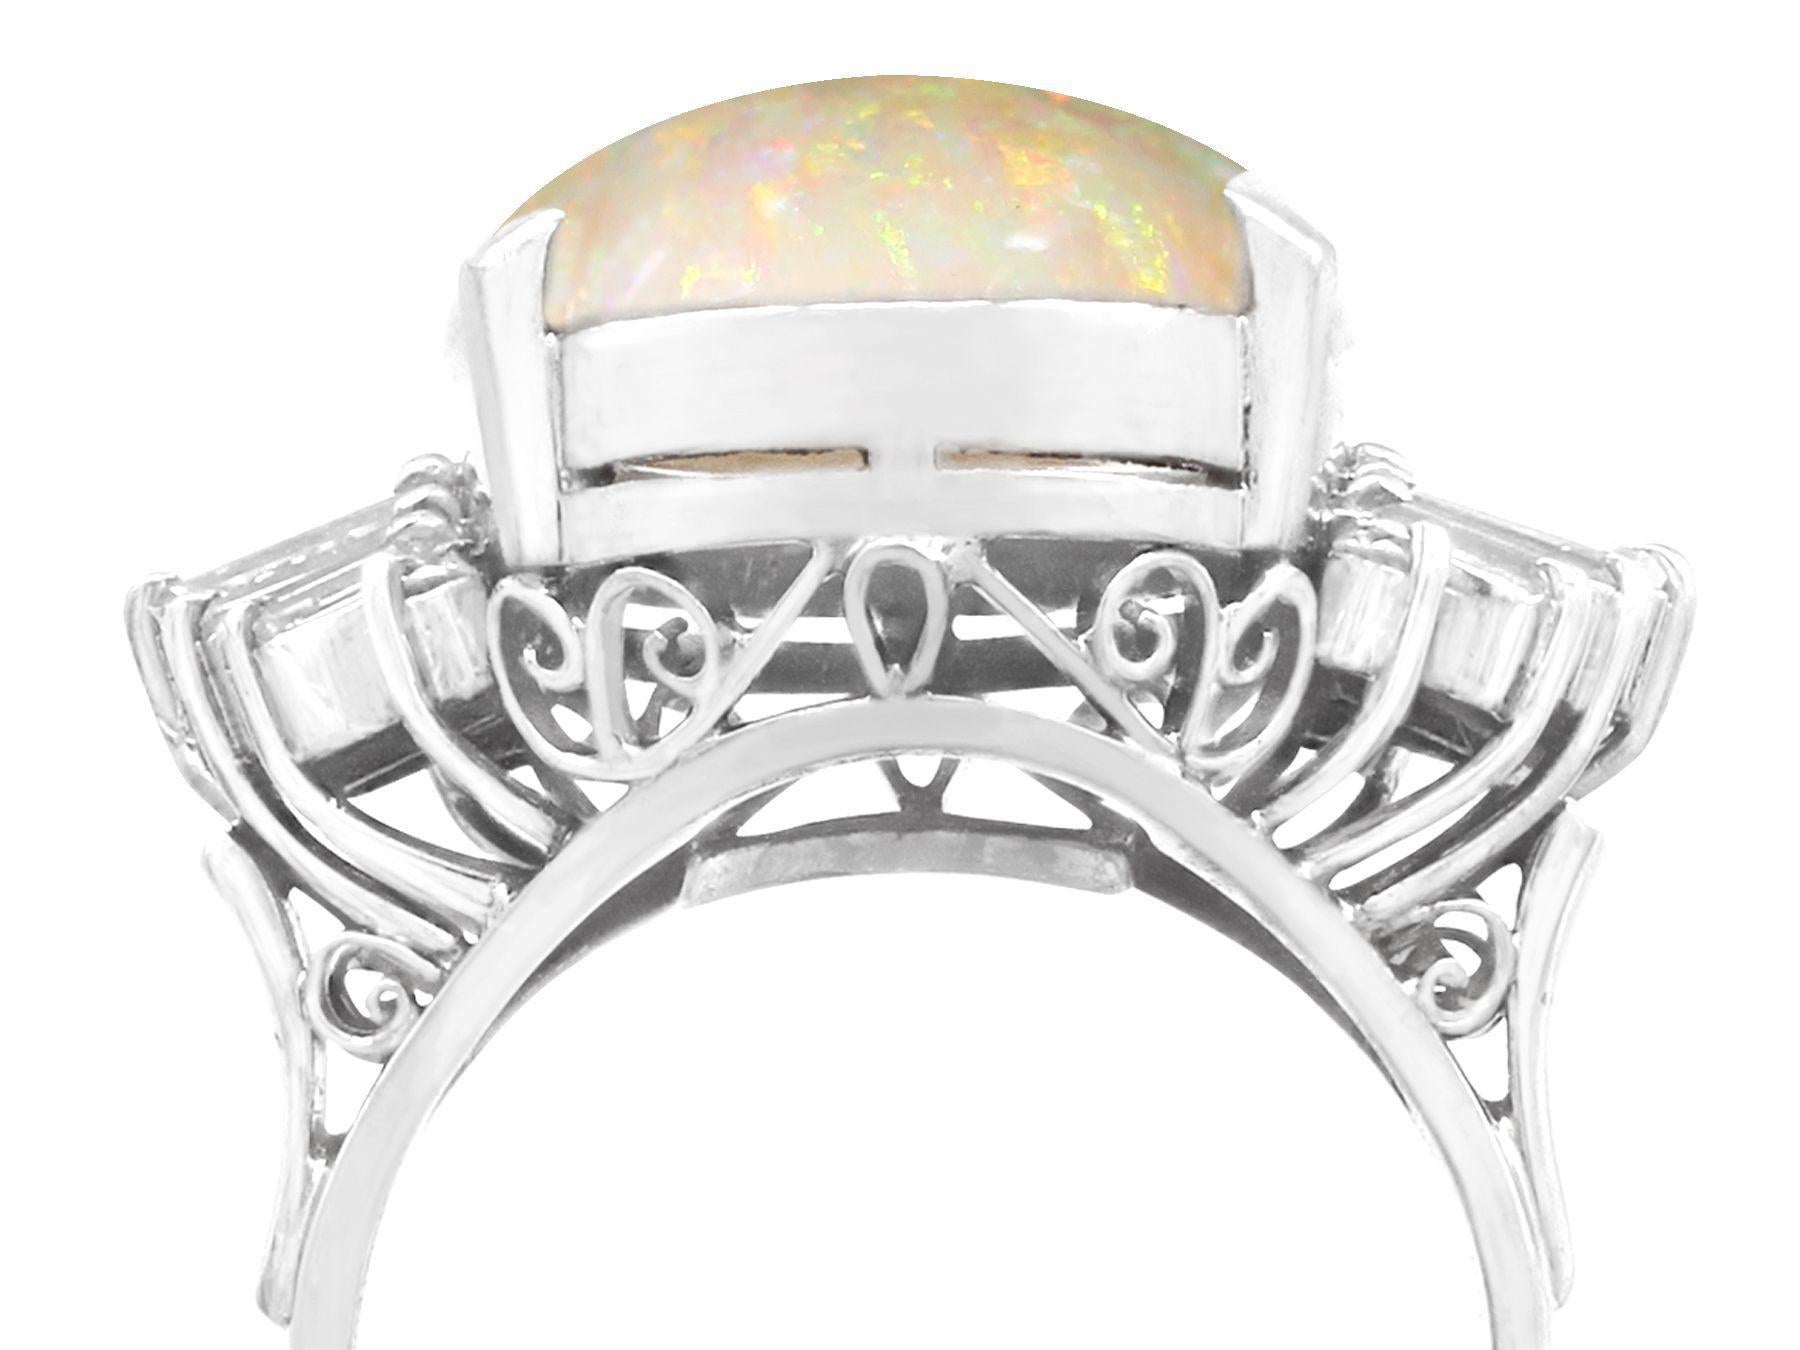 A stunning, fine and impressive vintage 7.39 carat opal and 0.82 carat diamond, platinum dress ring; part of our diverse vintage jewelry and estate jewelry collections.

This stunning vintage cabochon cut opal cocktail ring has been crafted in